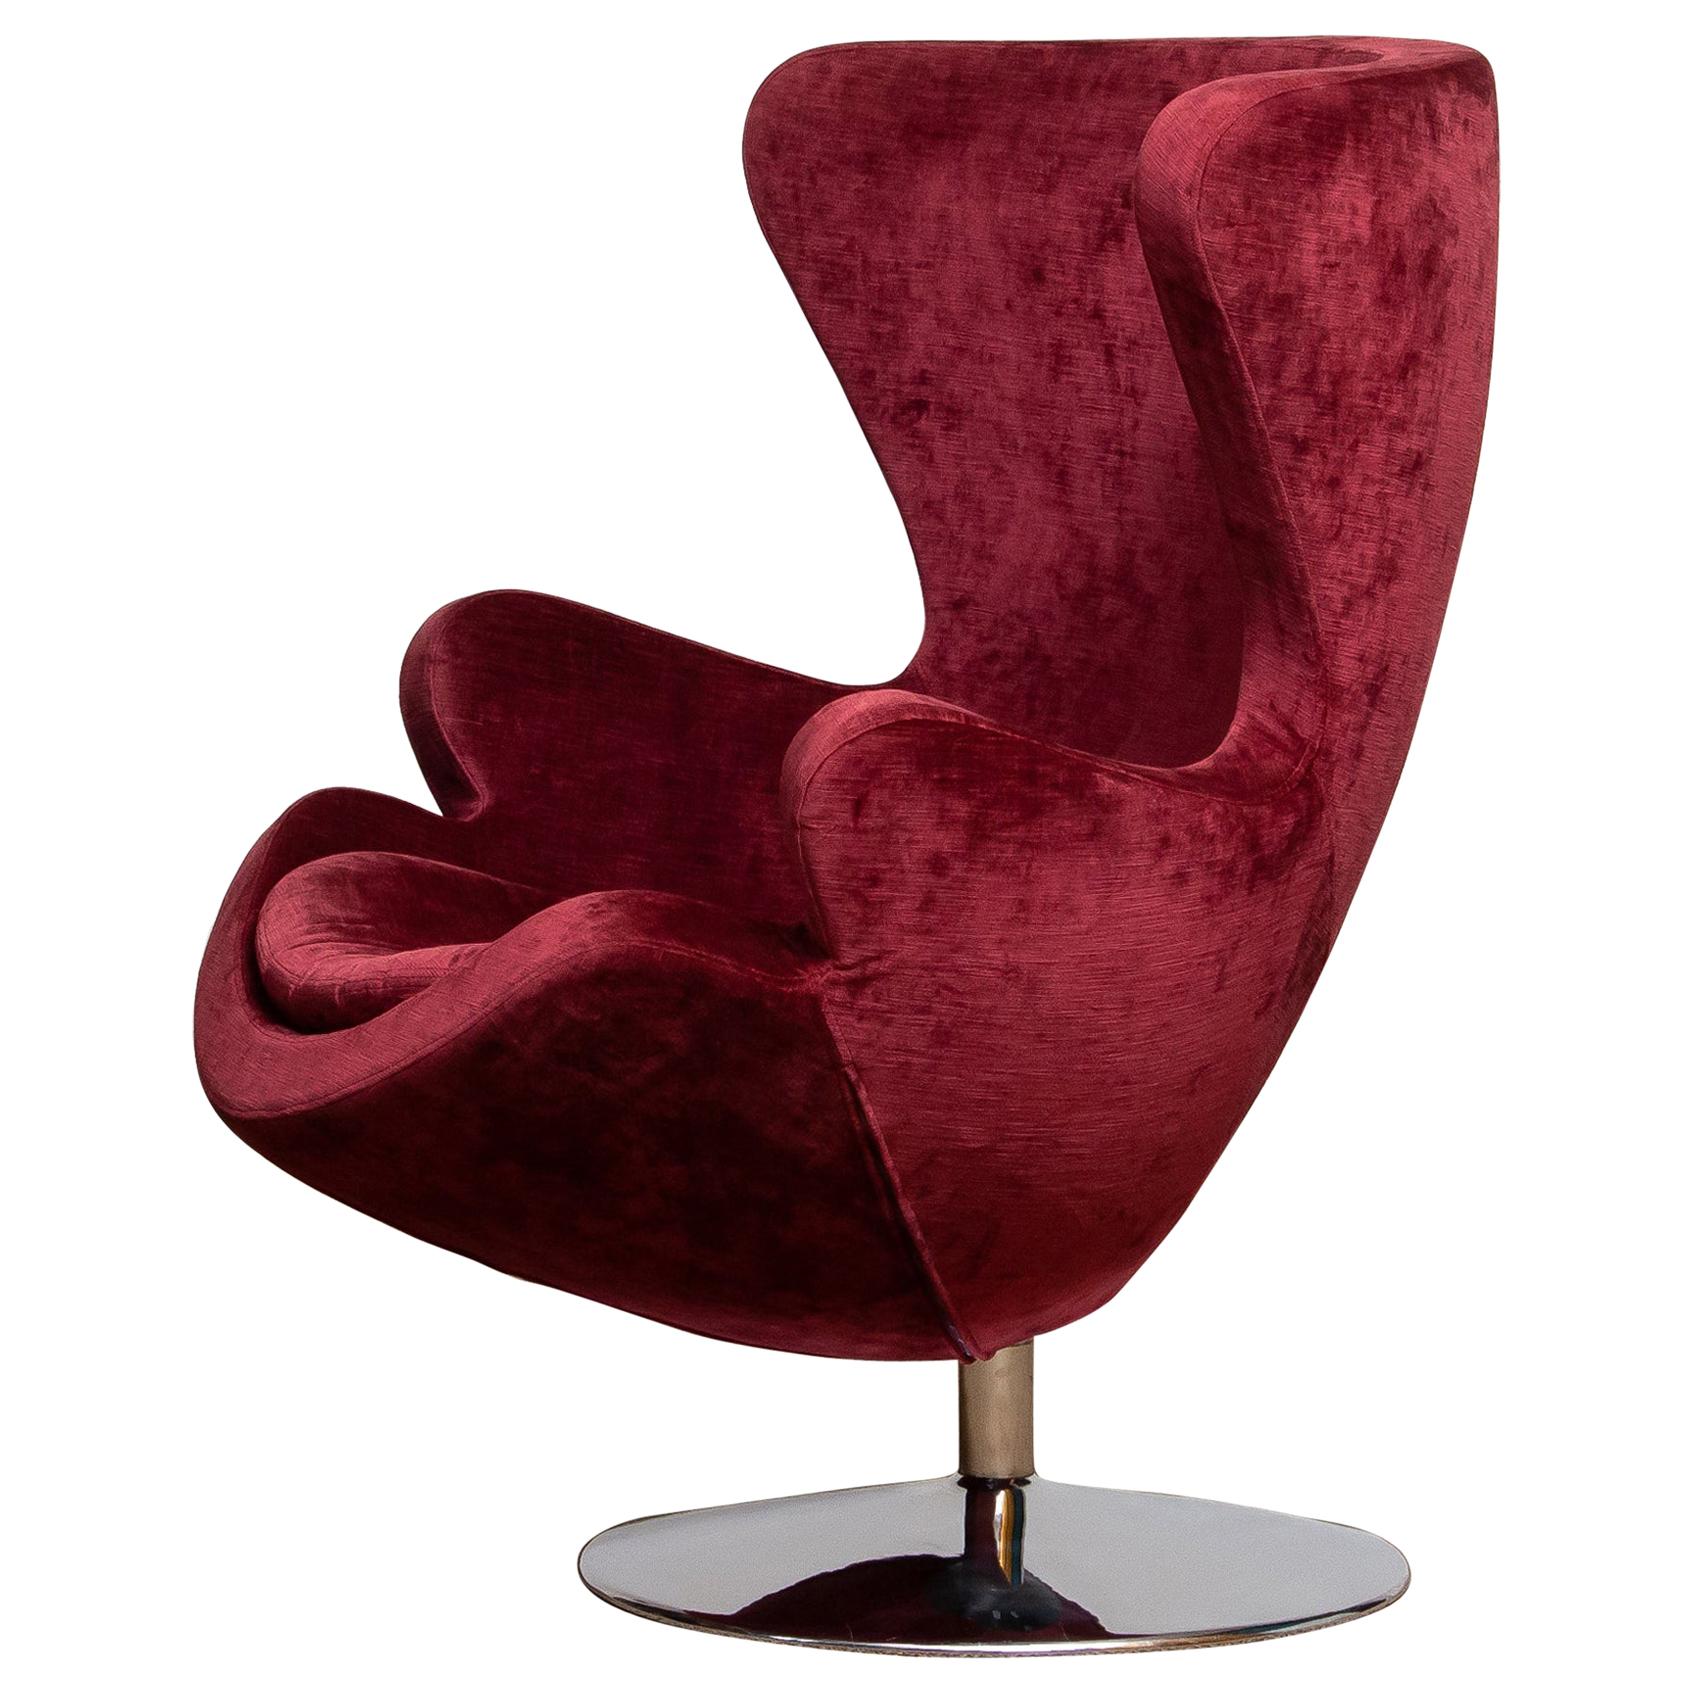 Mid-Century Modern 1970s Swivel Lounge Egg Chair on Chrome Stand Colored in Bordeaux Red Baby Roy